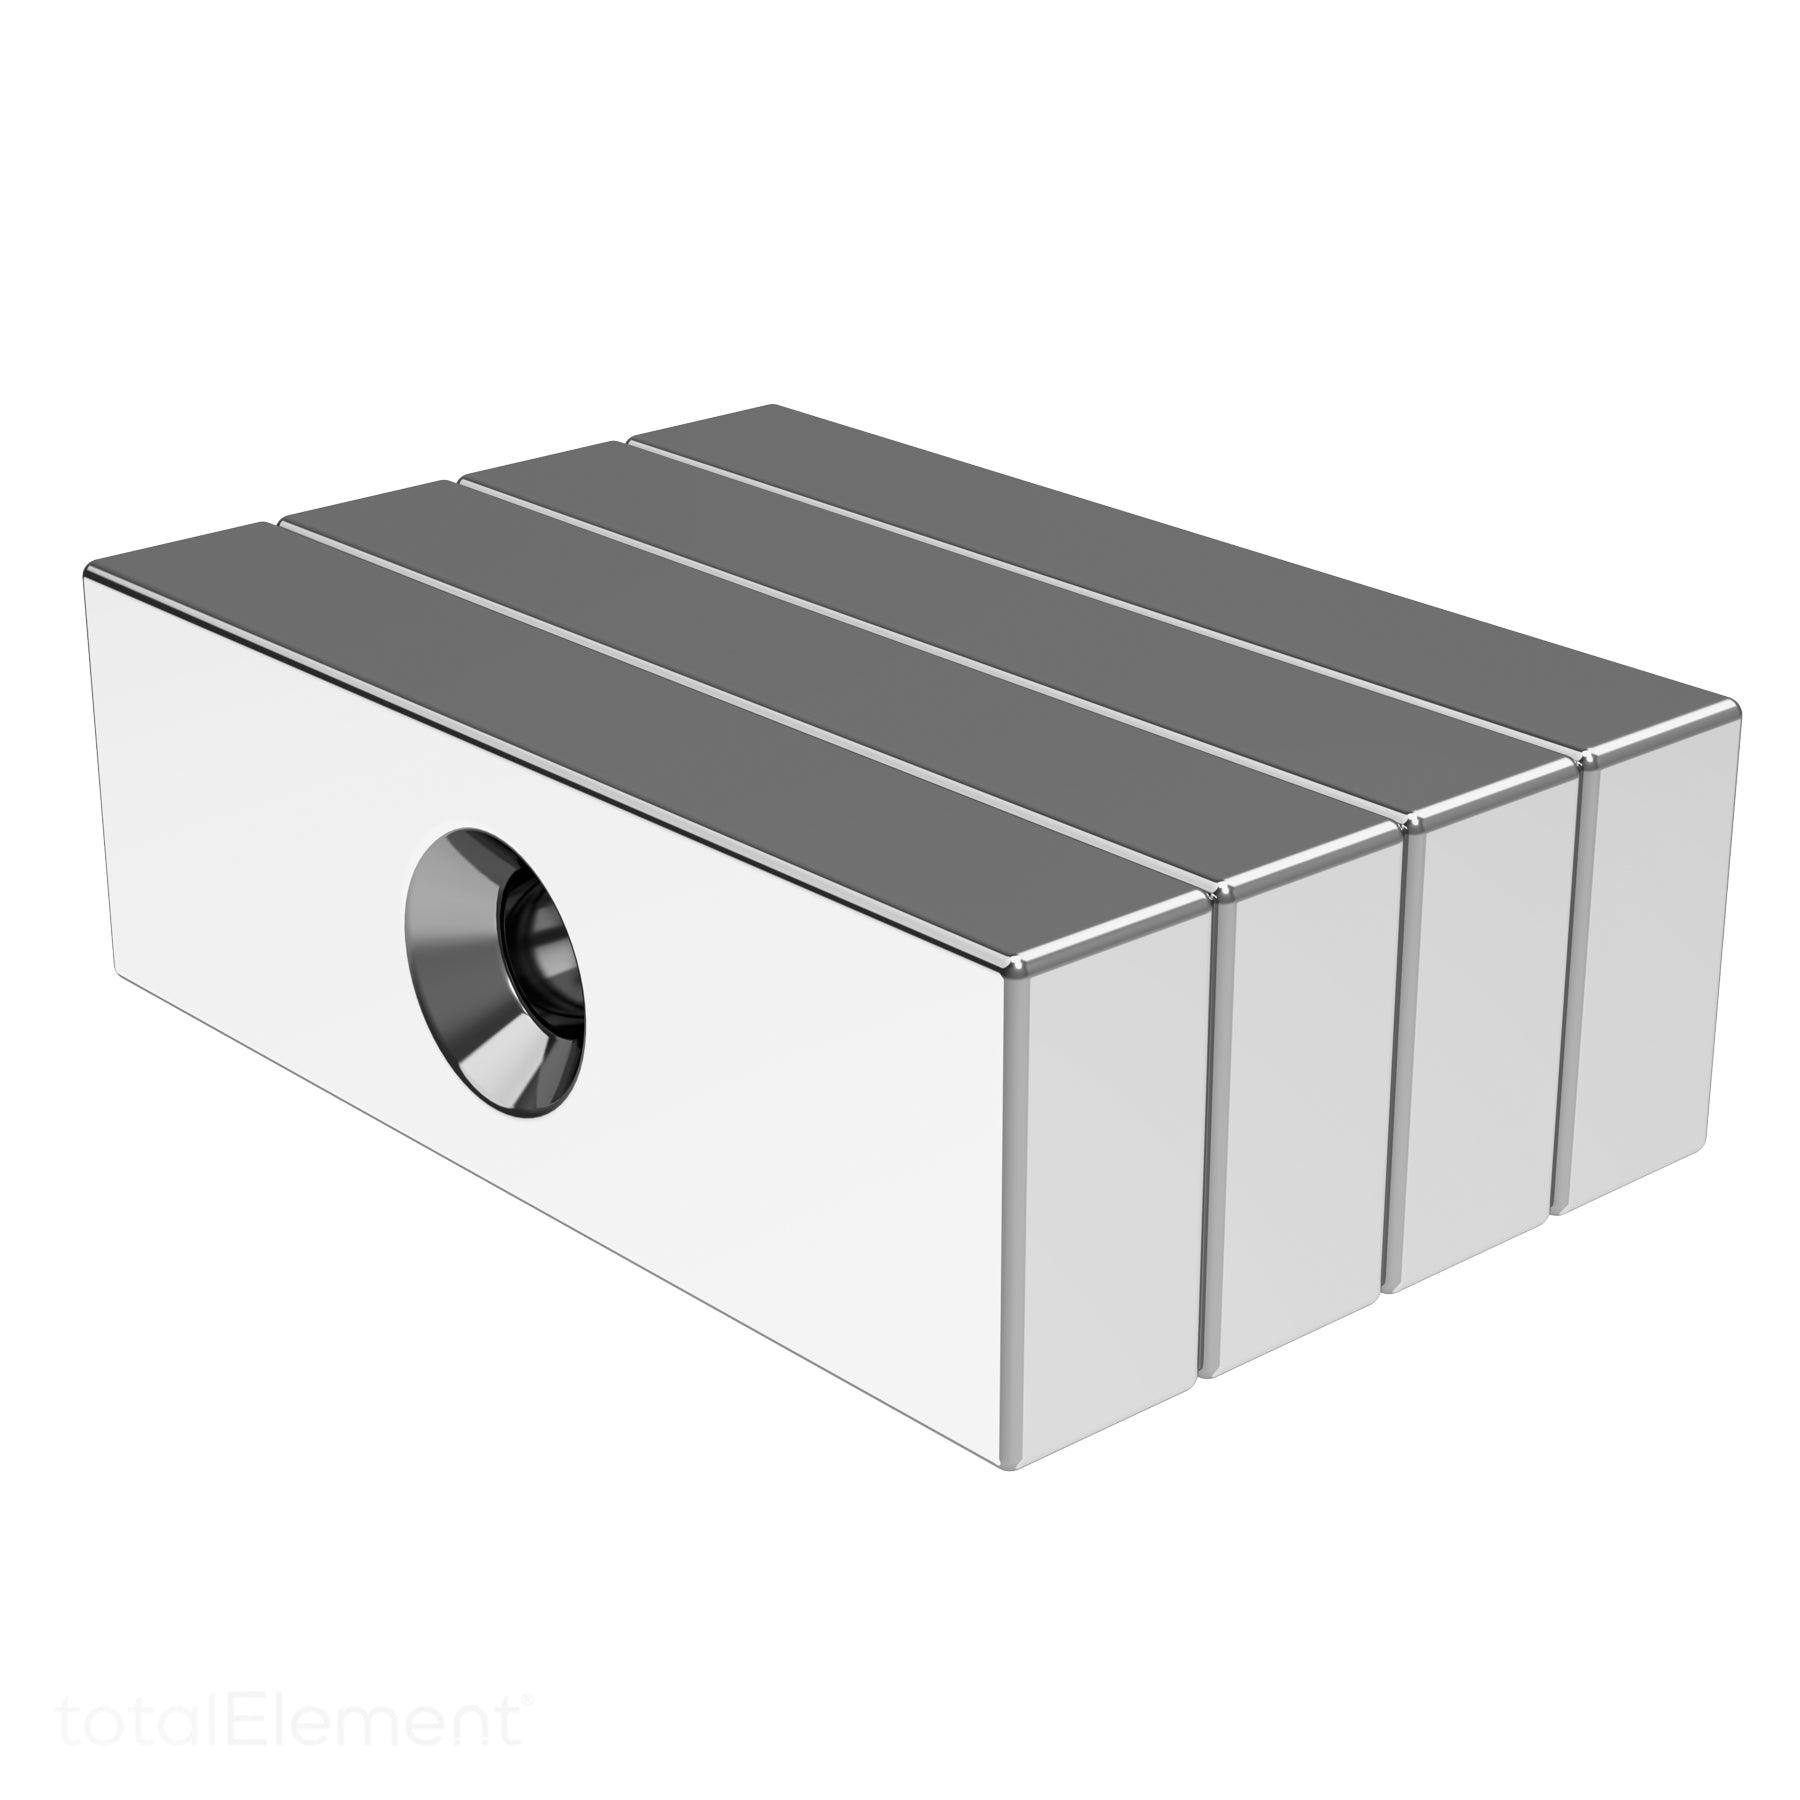 1.5 x 1/2 x 1/4 inch Neodymium Rare Earth Double-Sided Countersunk Block Magnets N52 (4 Pack)